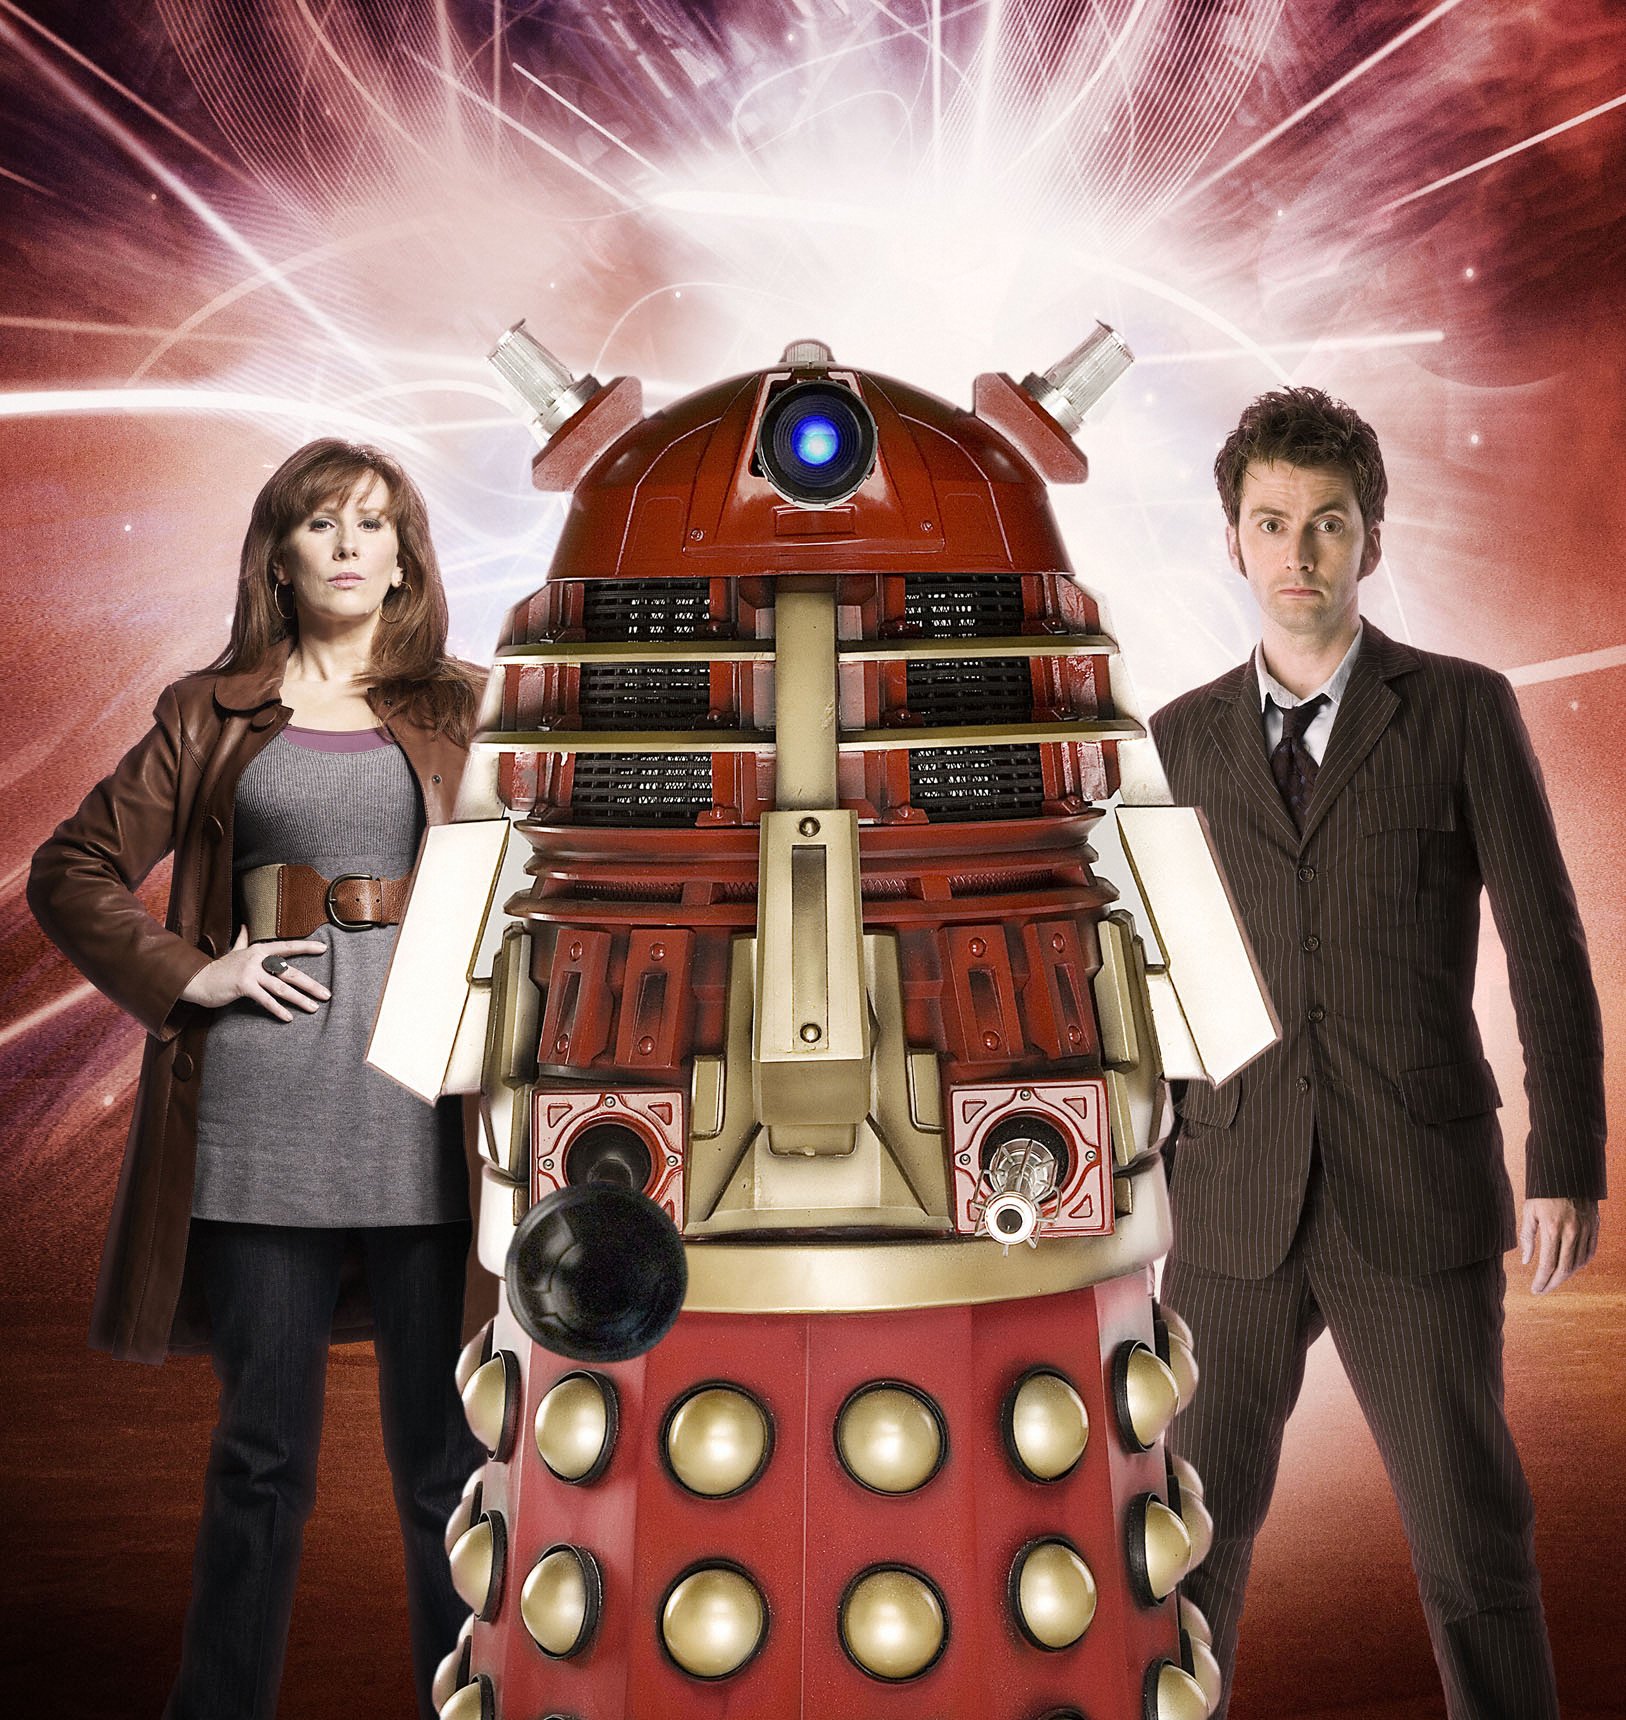 Geek insider, geekinsider, geekinsider. Com,, doctor who - how to become a whovian? , entertainment